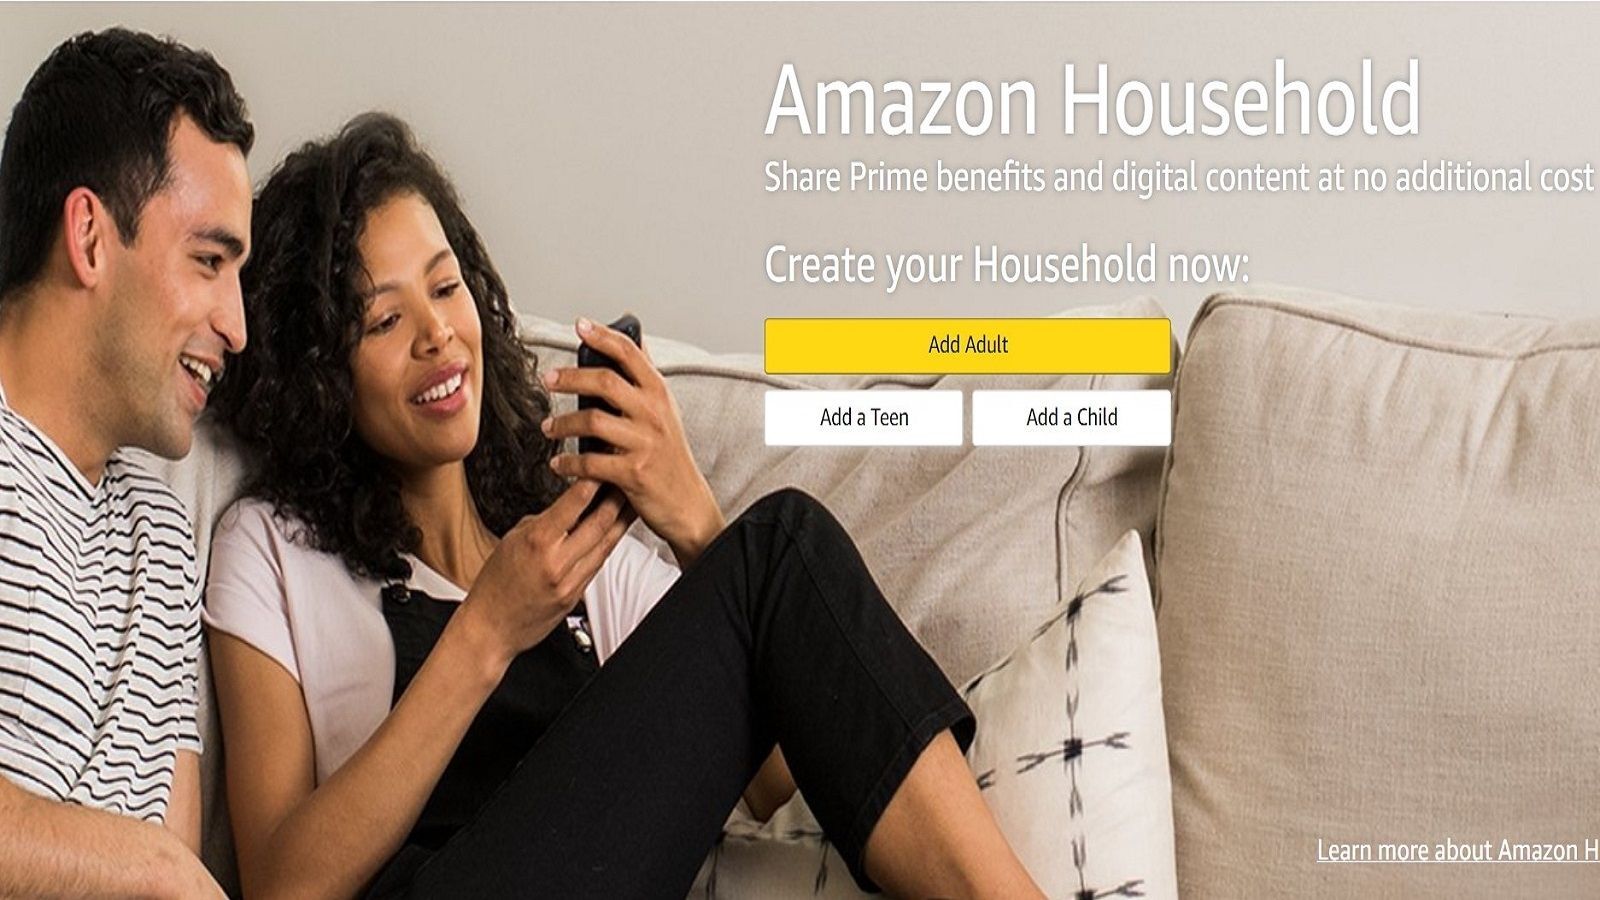 What Is Amazon Household? (All You Need to Know)